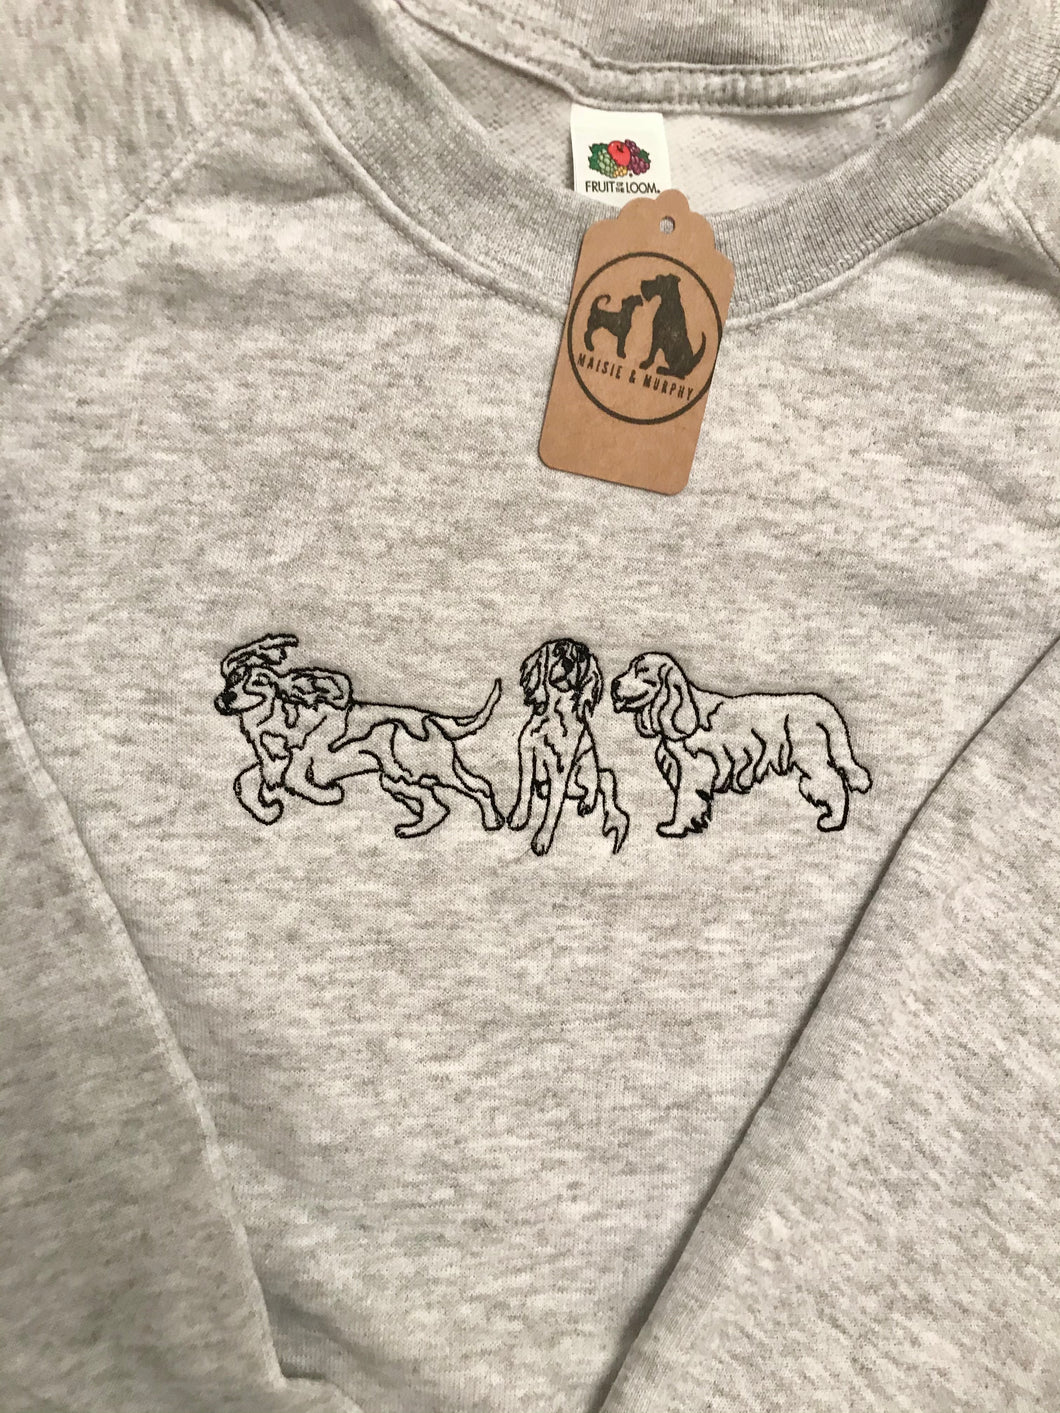 Embroidered Spaniel Sweatshirt - Gifts for spaniel lovers and owners